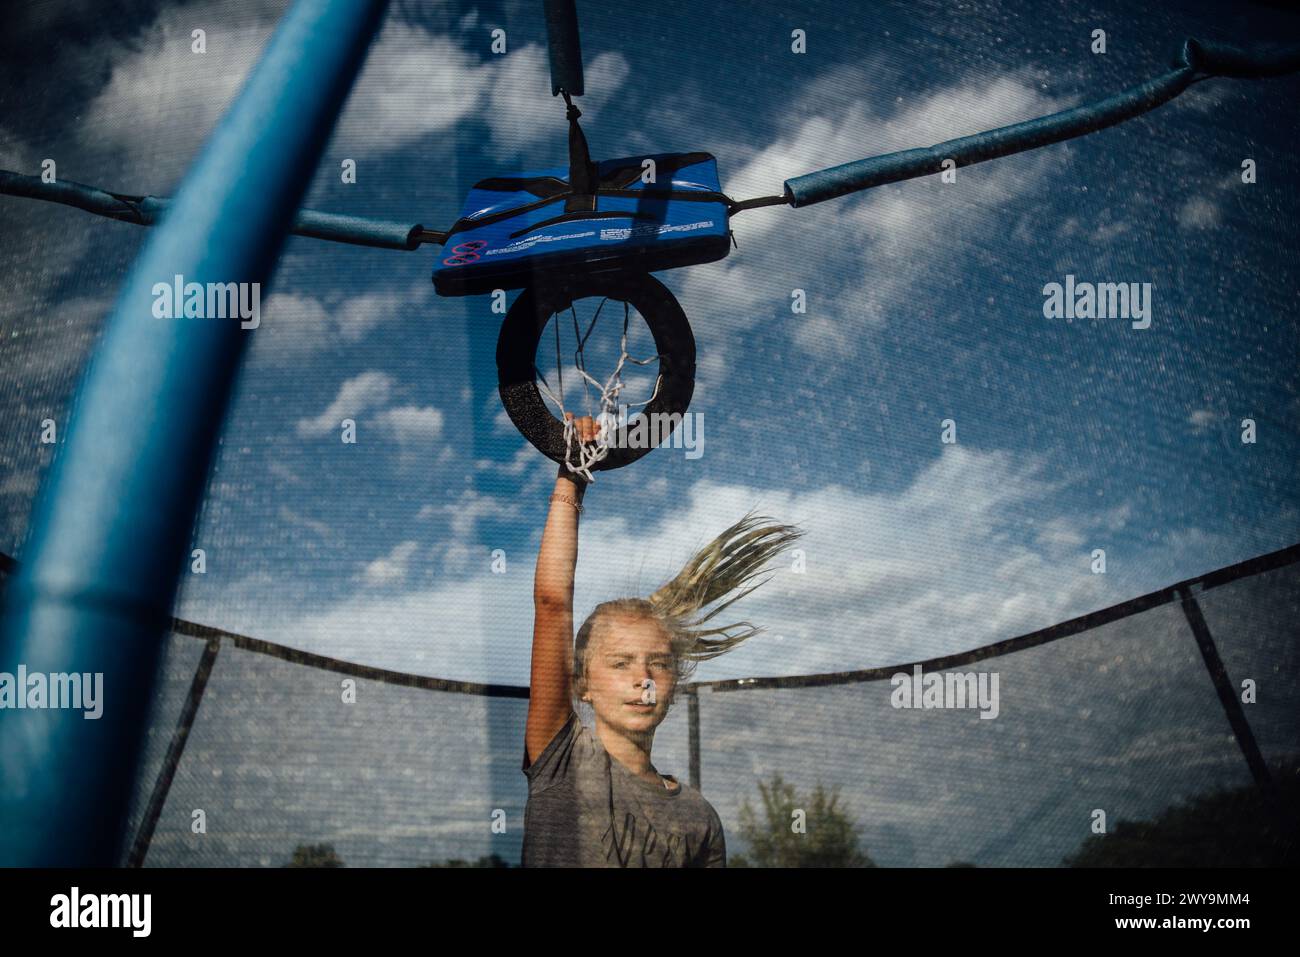 Preteen girl playing basketball on trampoline outdoors in summer Stock Photo